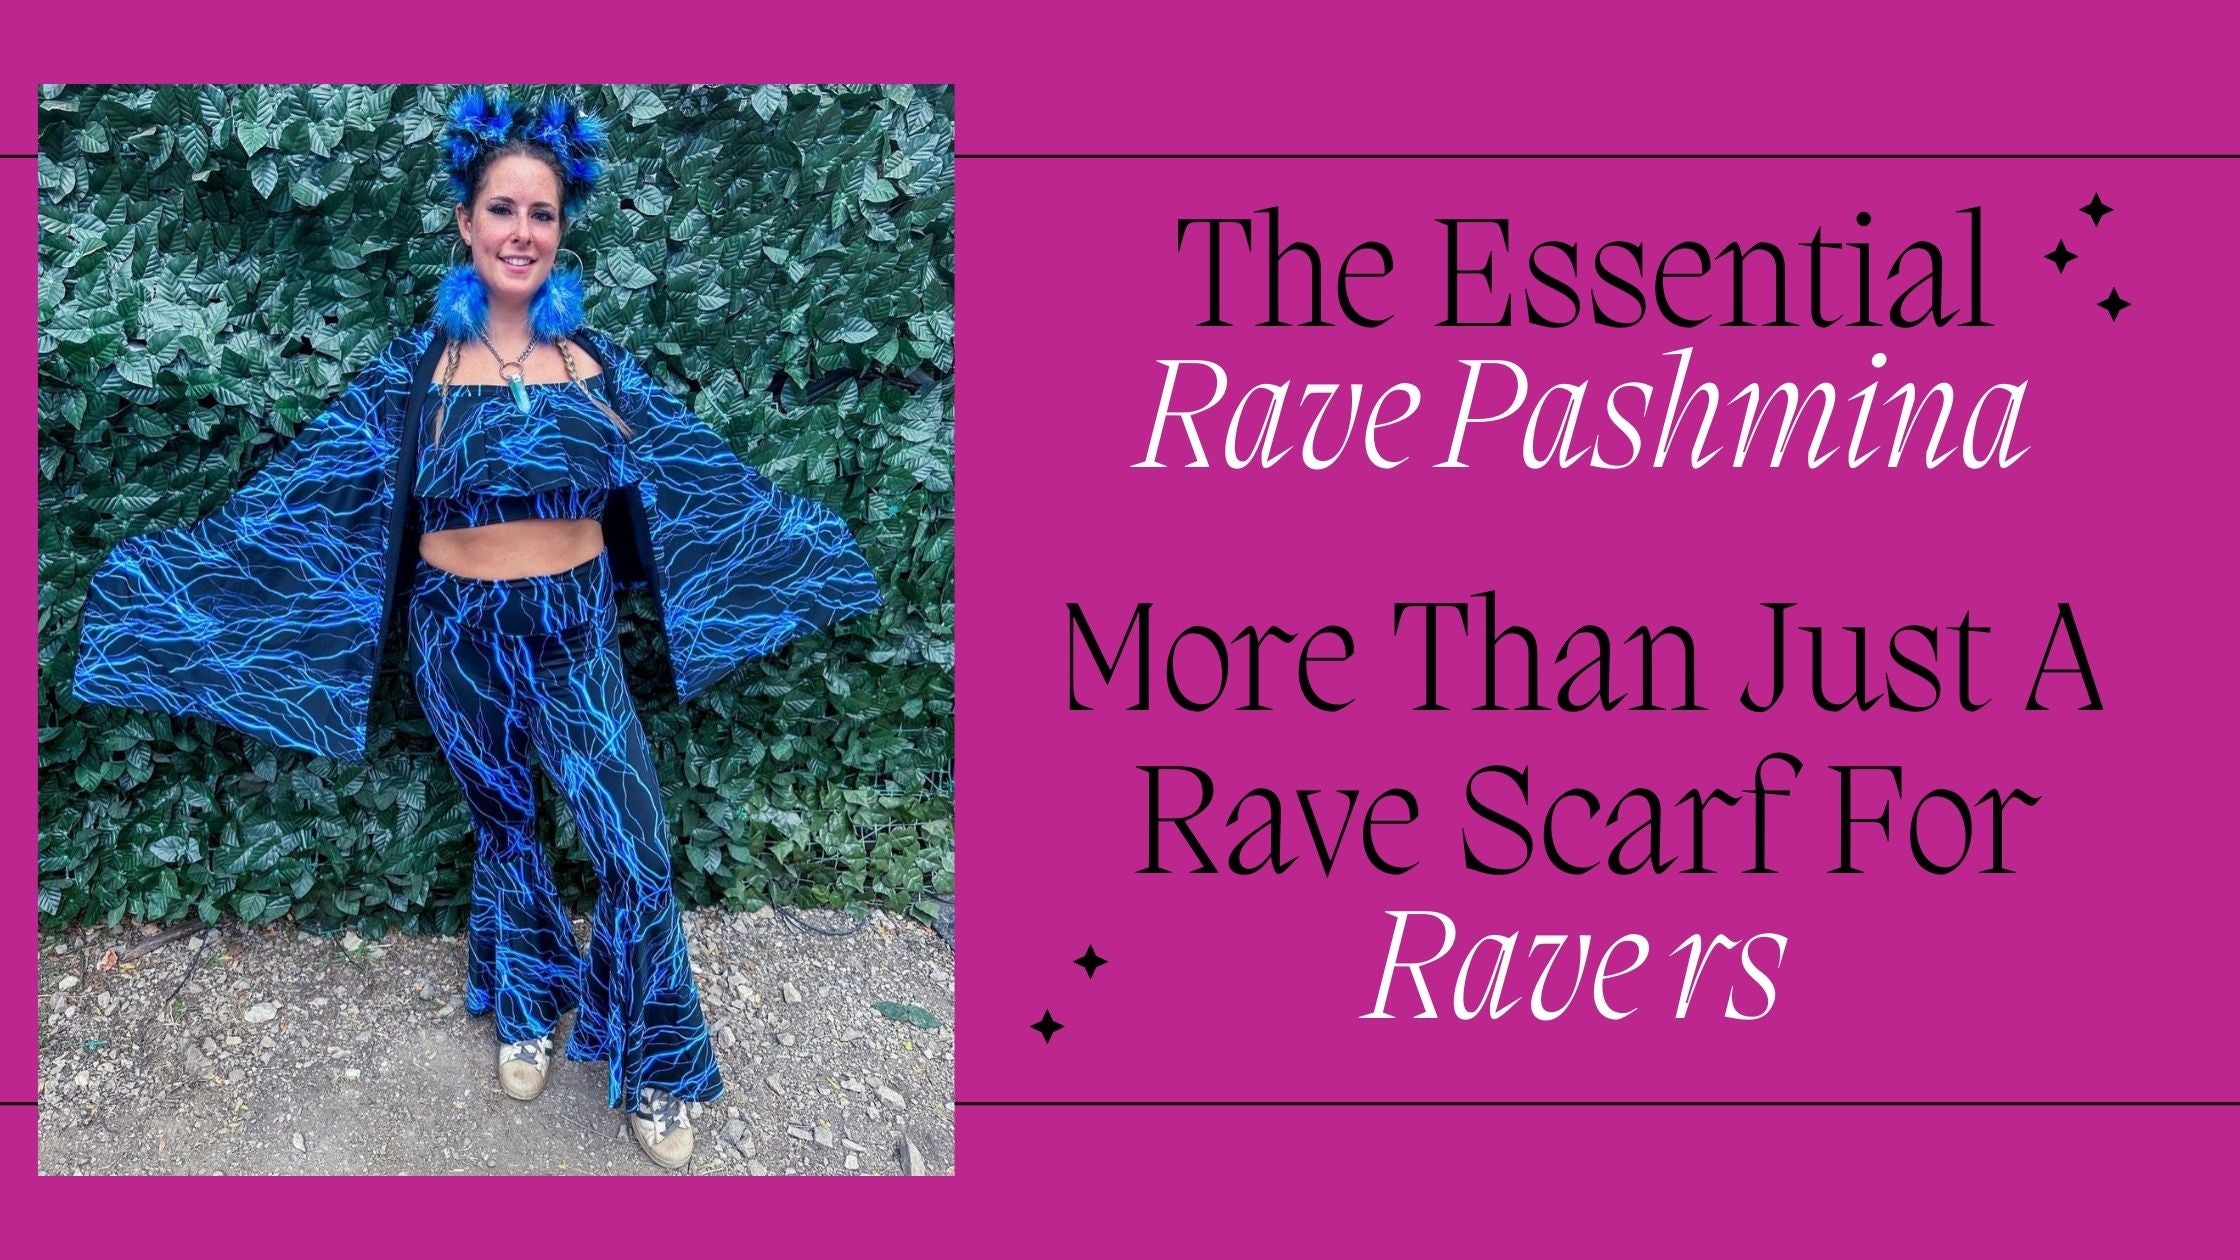 A History of Rave Clothing  Rave fashion, Rave outfits edc, Rave